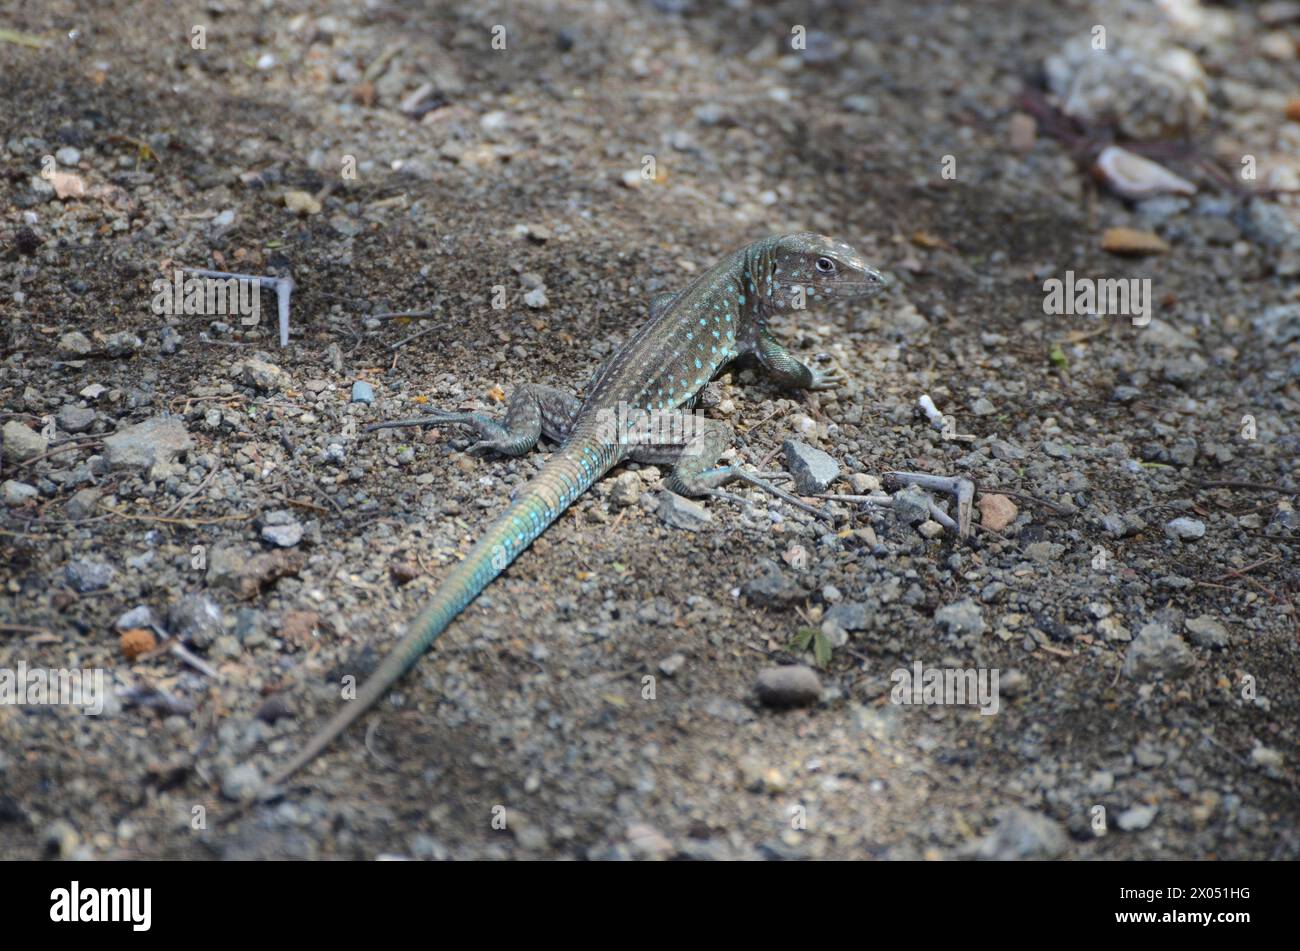 A lizard is laying on the ground in a rocky area. The lizard is blue and green in color Stock Photo